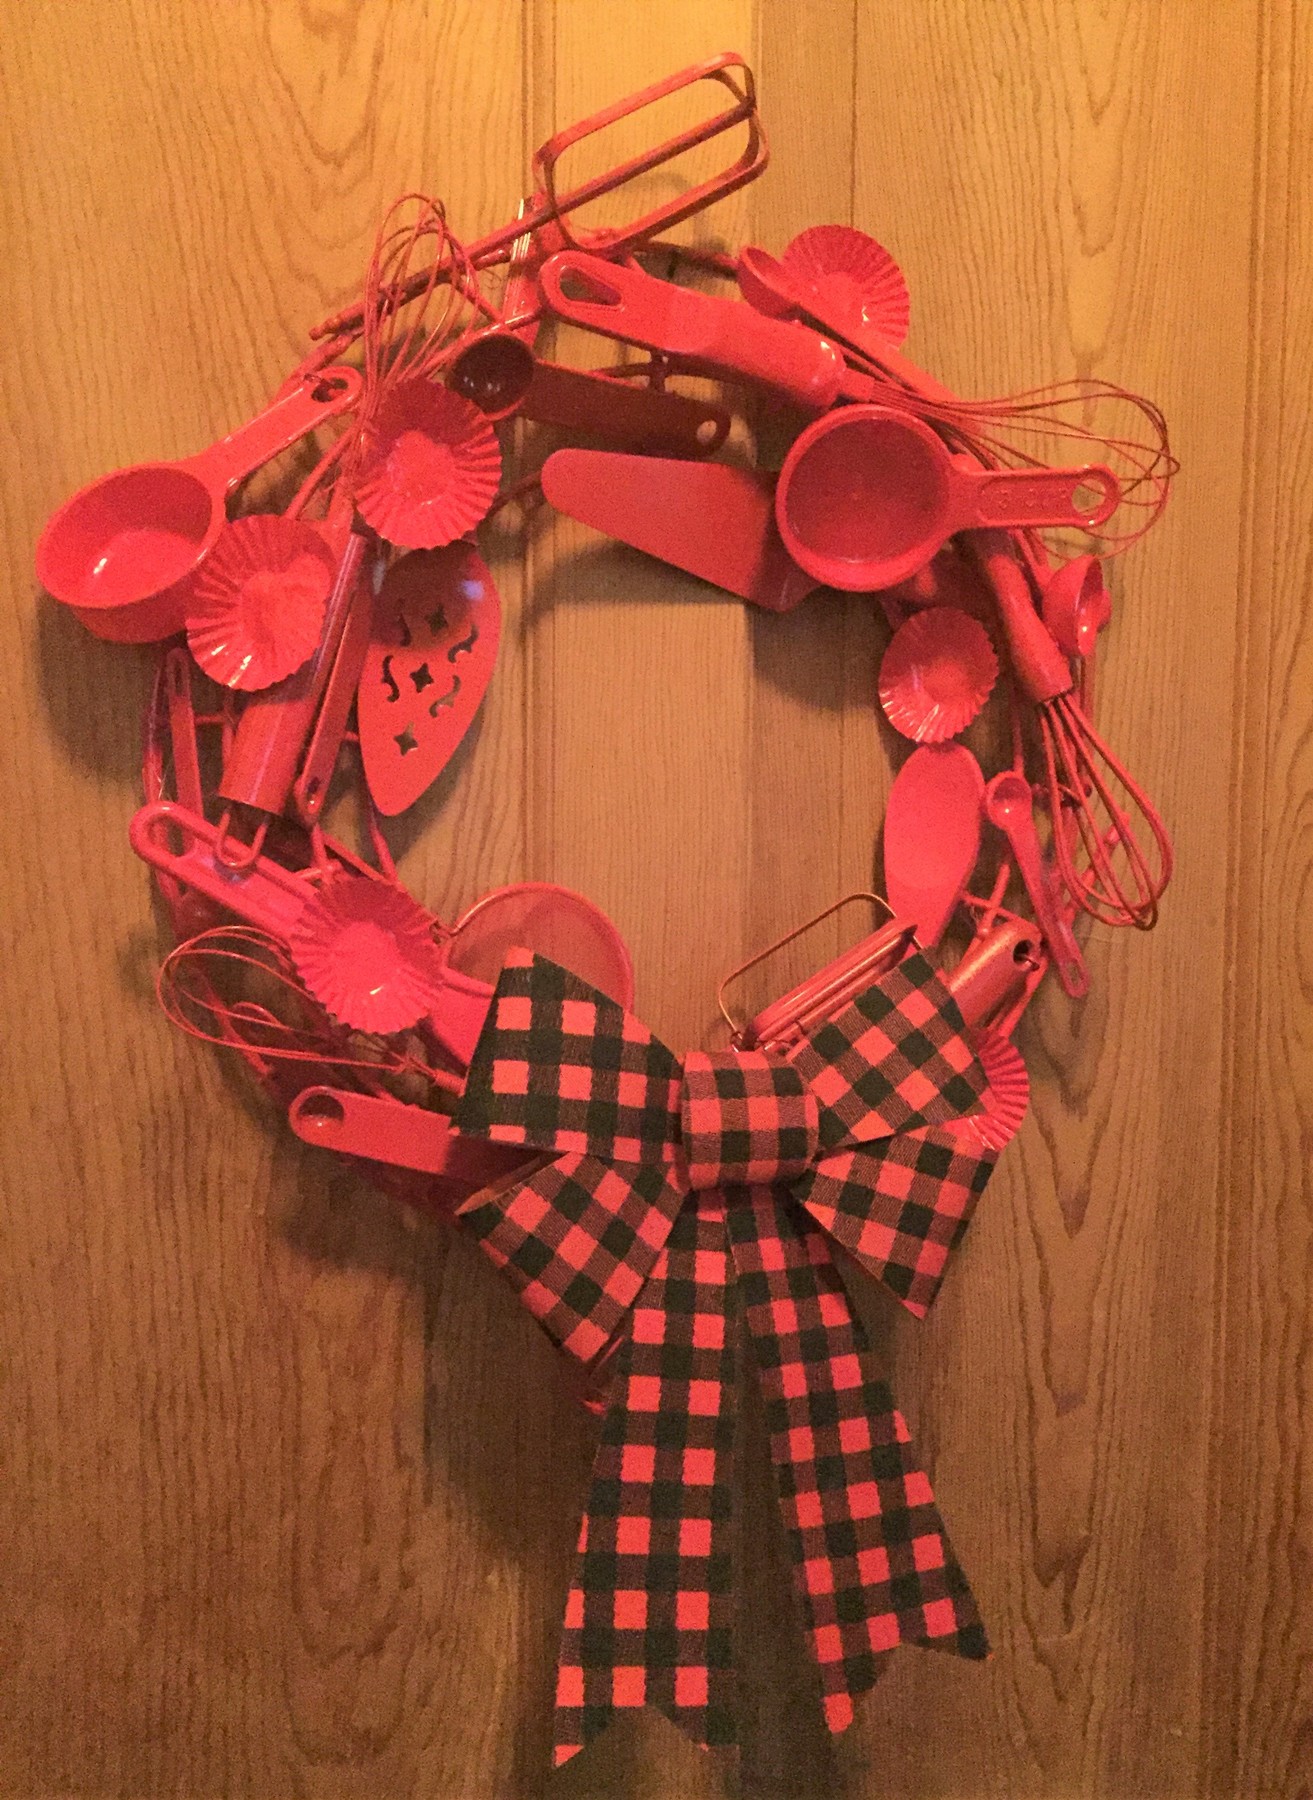 Tim's completed utensil wreath with bow.